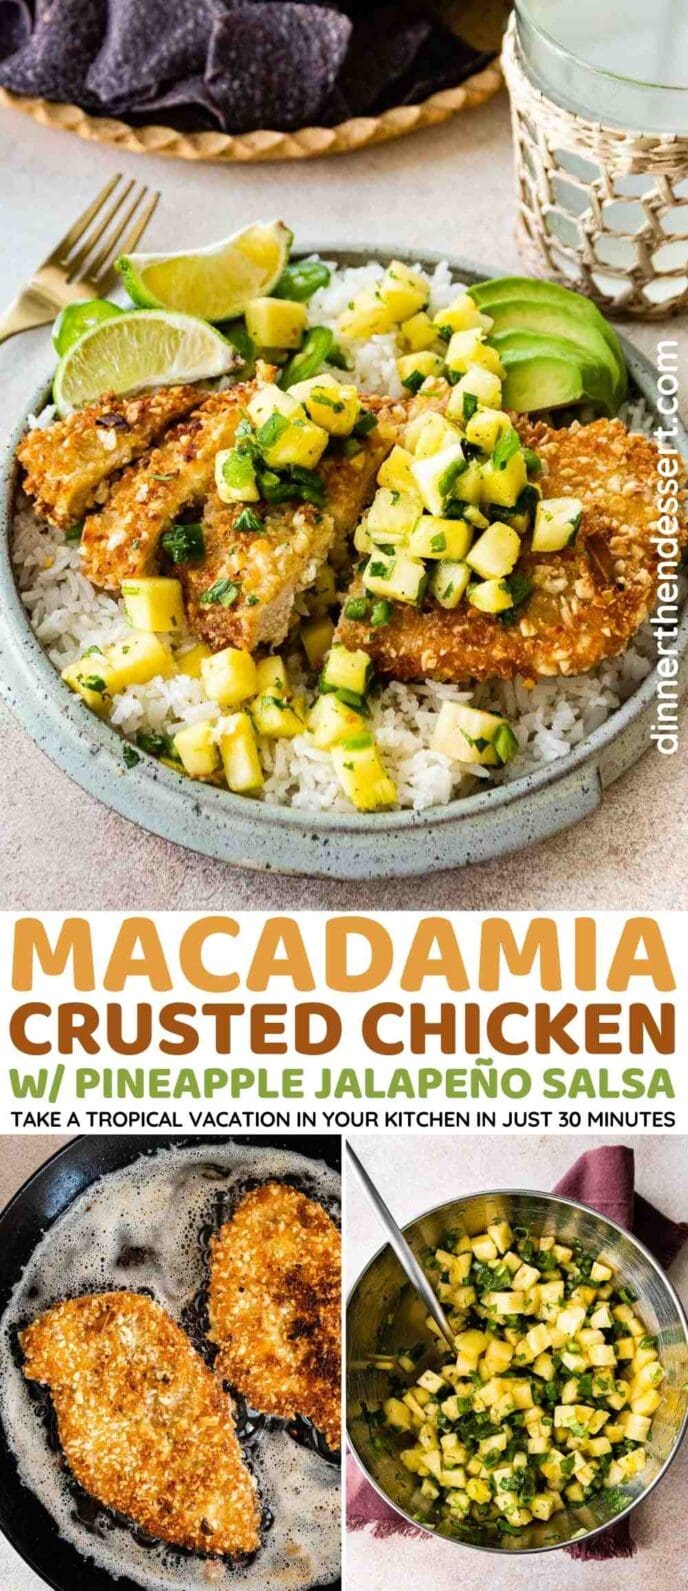 Macadamia Crusted Chicken with Pineapple Jalapeno Salsa Collage